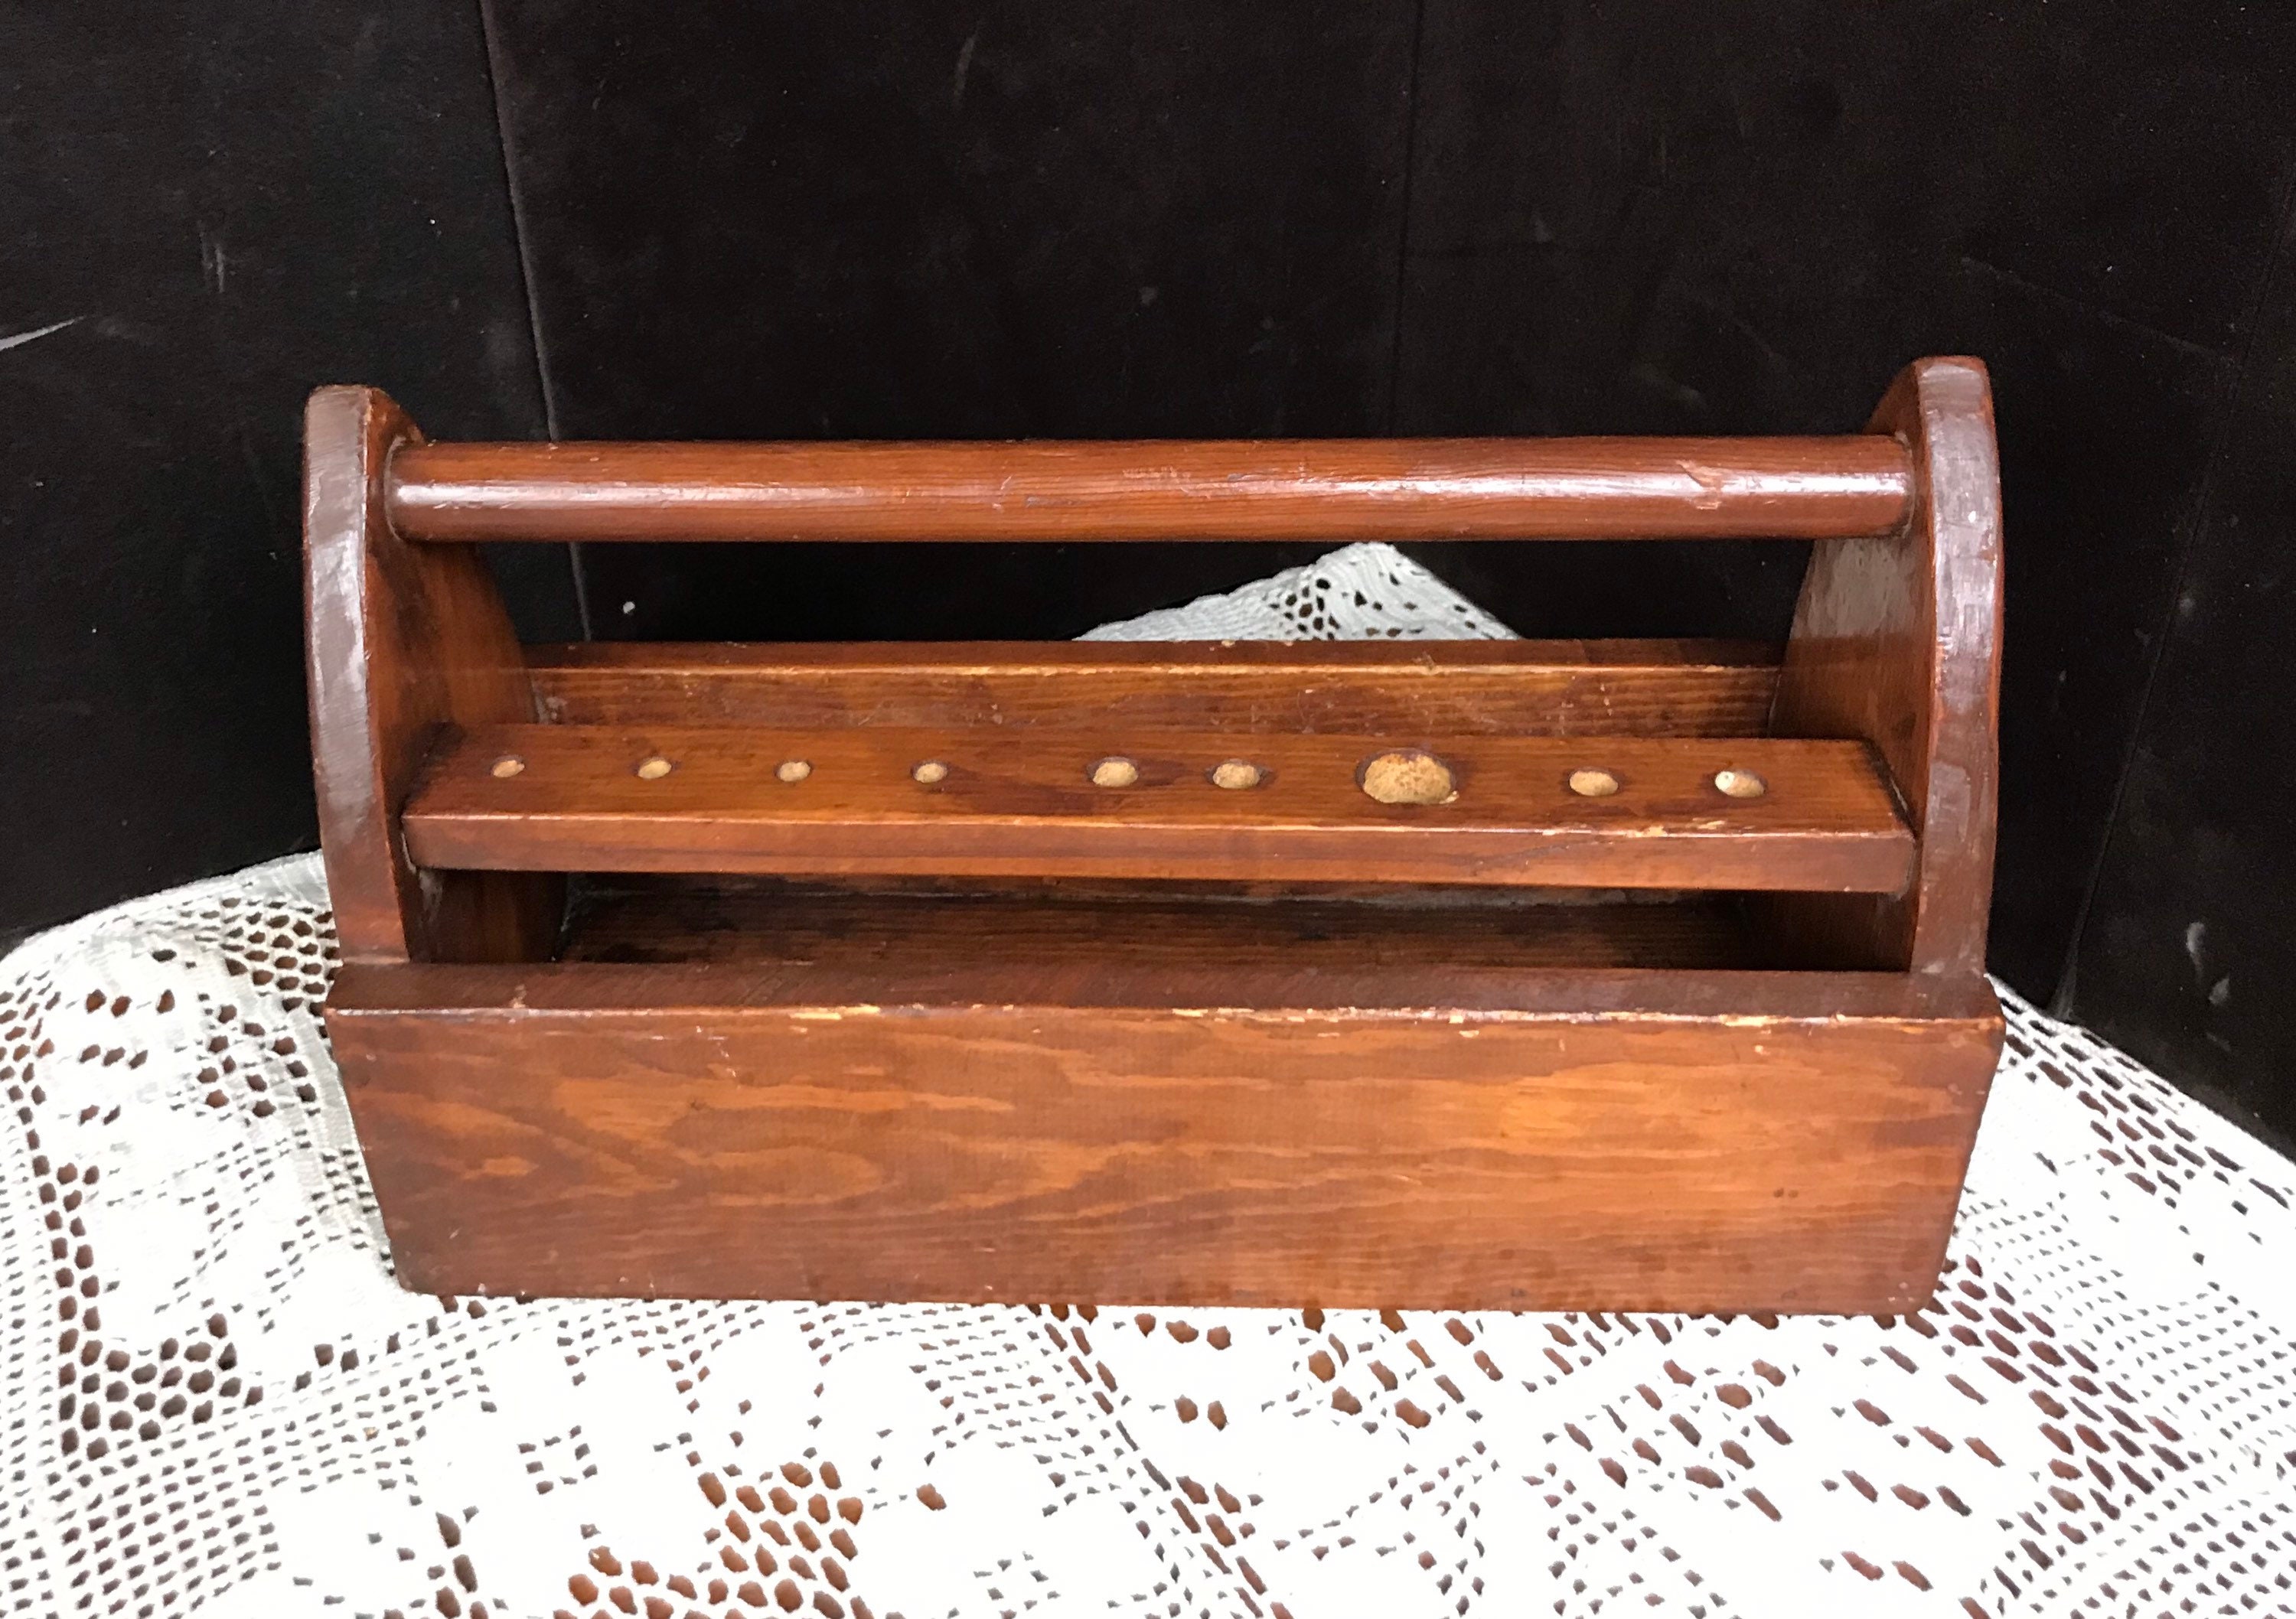 Vintage French Hand Made Wooden Wood Craft Tool Portable Carry Carrying Case  Box Carry Stand Display Toolbox Circa 1940-50's / EVE De France 